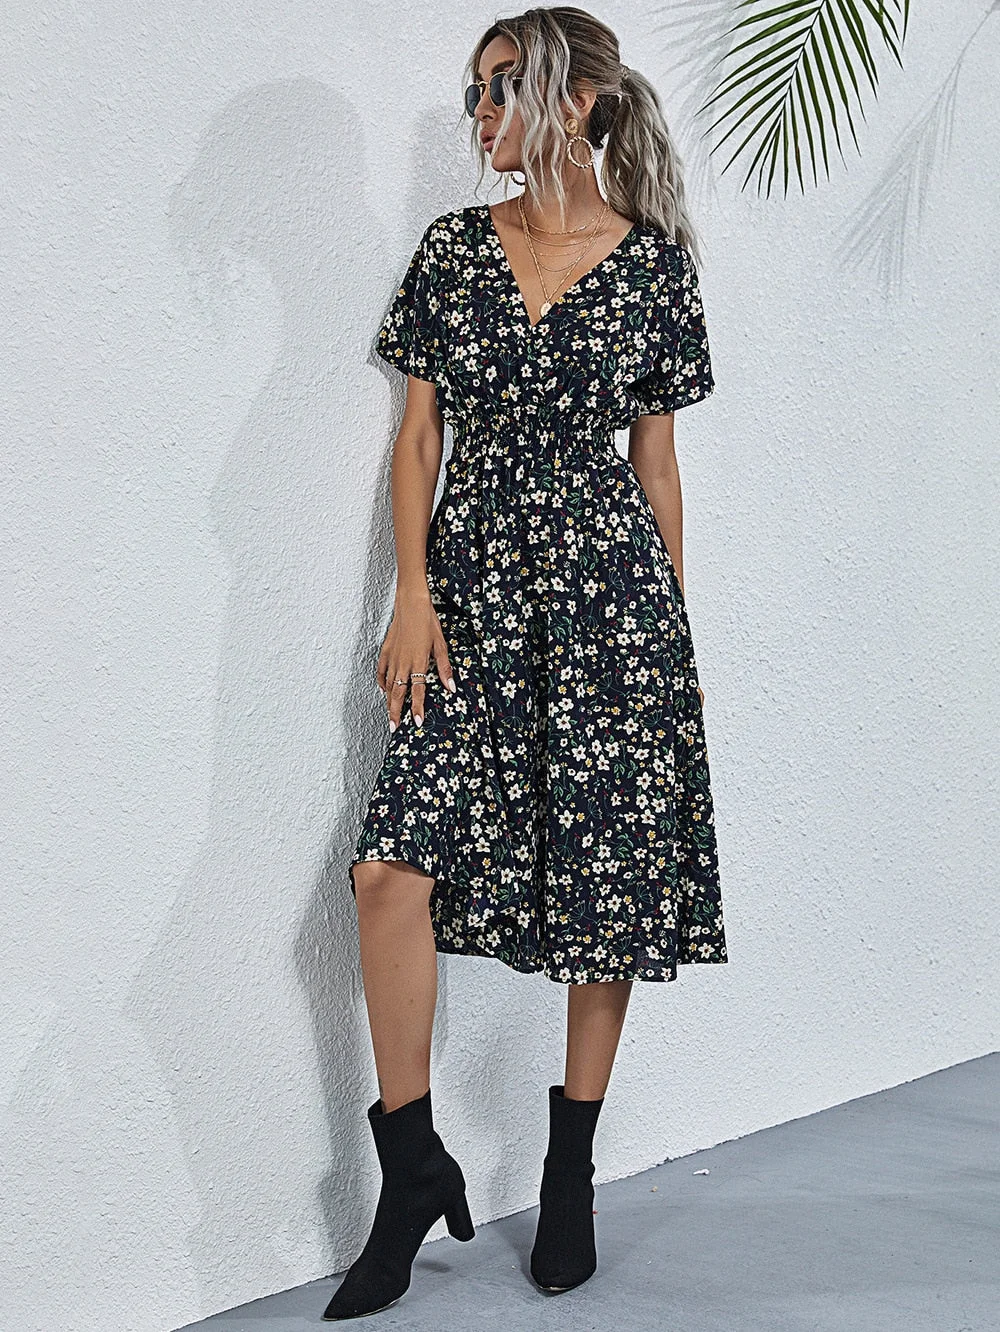 Abebey Back To School Fashion Printed V Neck Casual Loose High Waist Short Sleeve Floral  Summer For Women's Dresses 2023 Woman Vacation Dresses